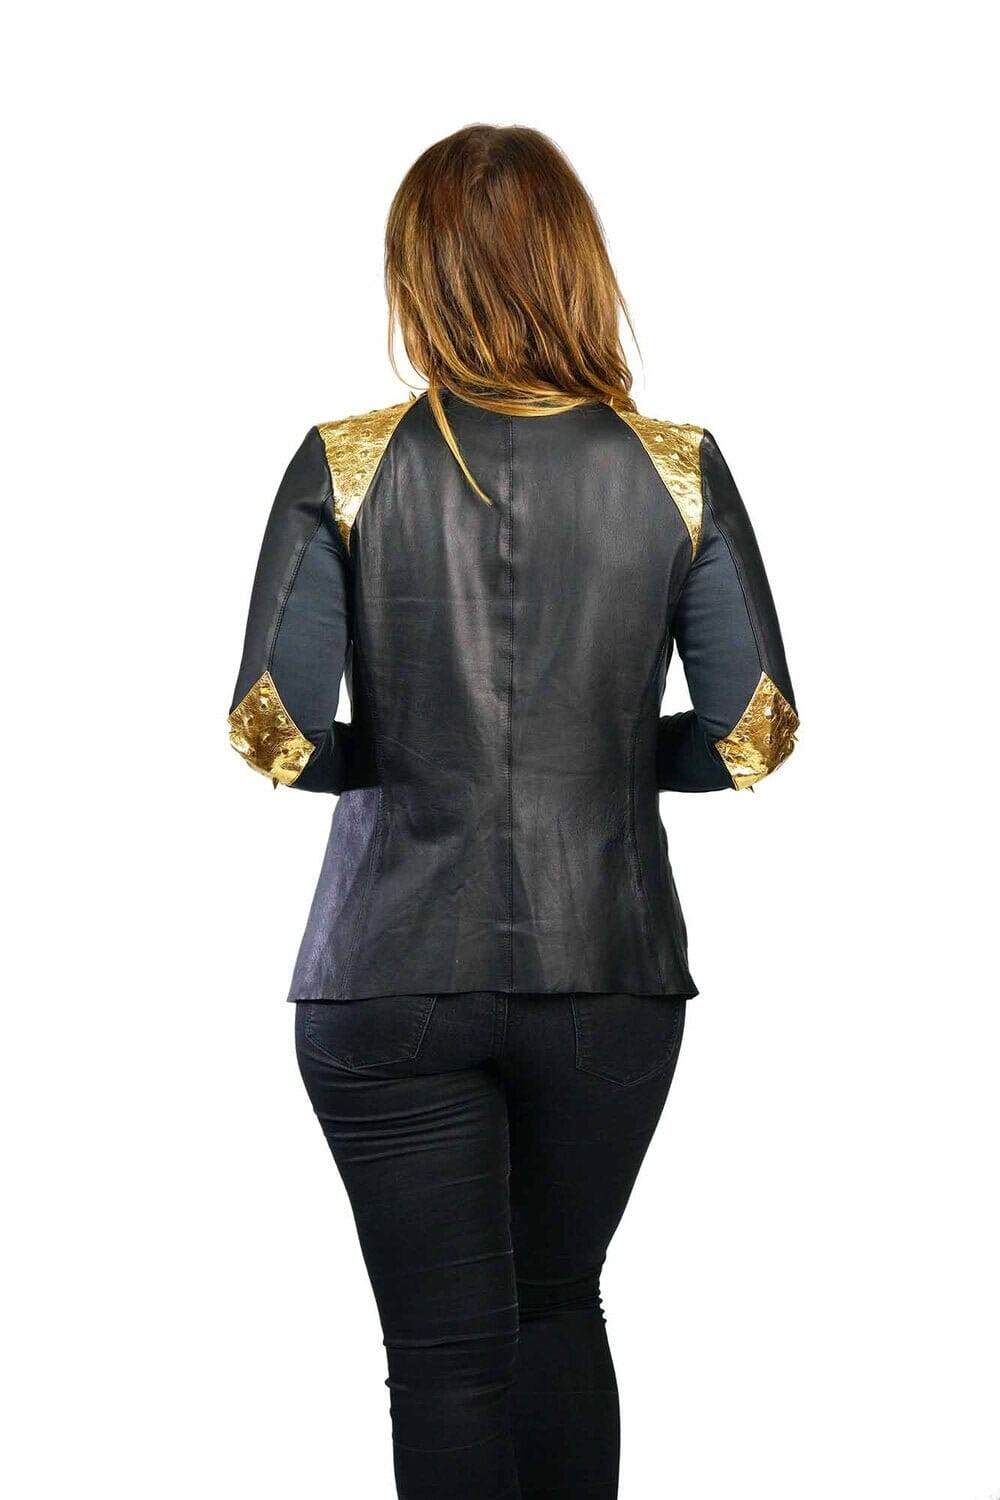 Black and Gold Leather Jacket by Love Khaos